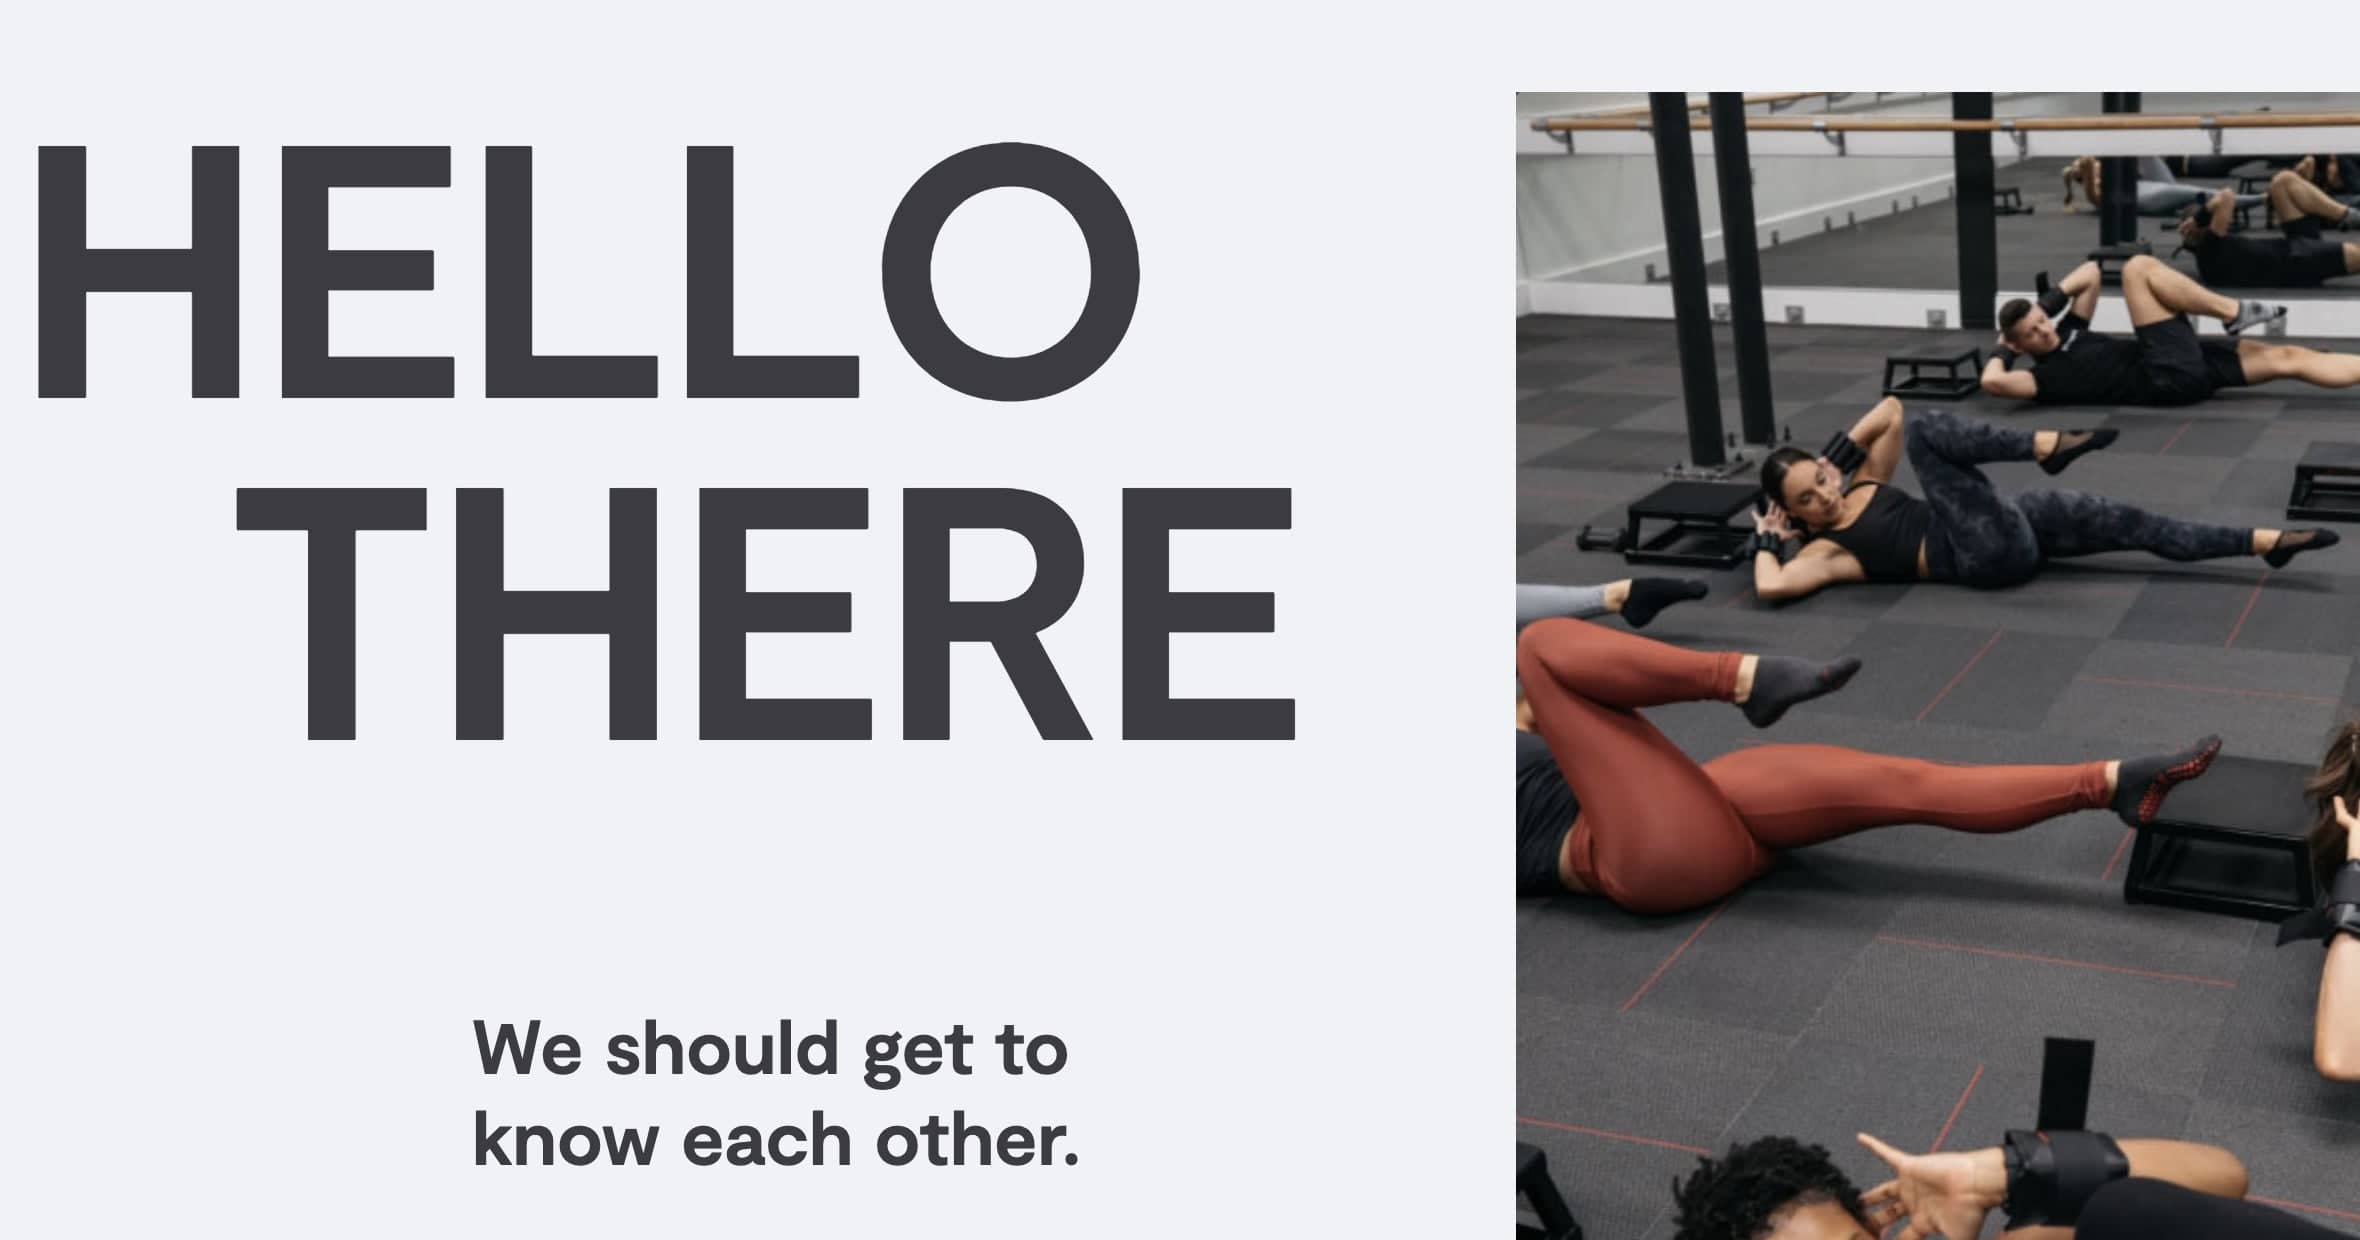 A group of people lies on exercise mats, performing leg lifts in a gym. Text on the left reads 'HELLO THERE. We should get to know each other.' As 2024 approaches, fitness tech companies are revolutionizing workouts like this one, making it easier to stay fit and connected.